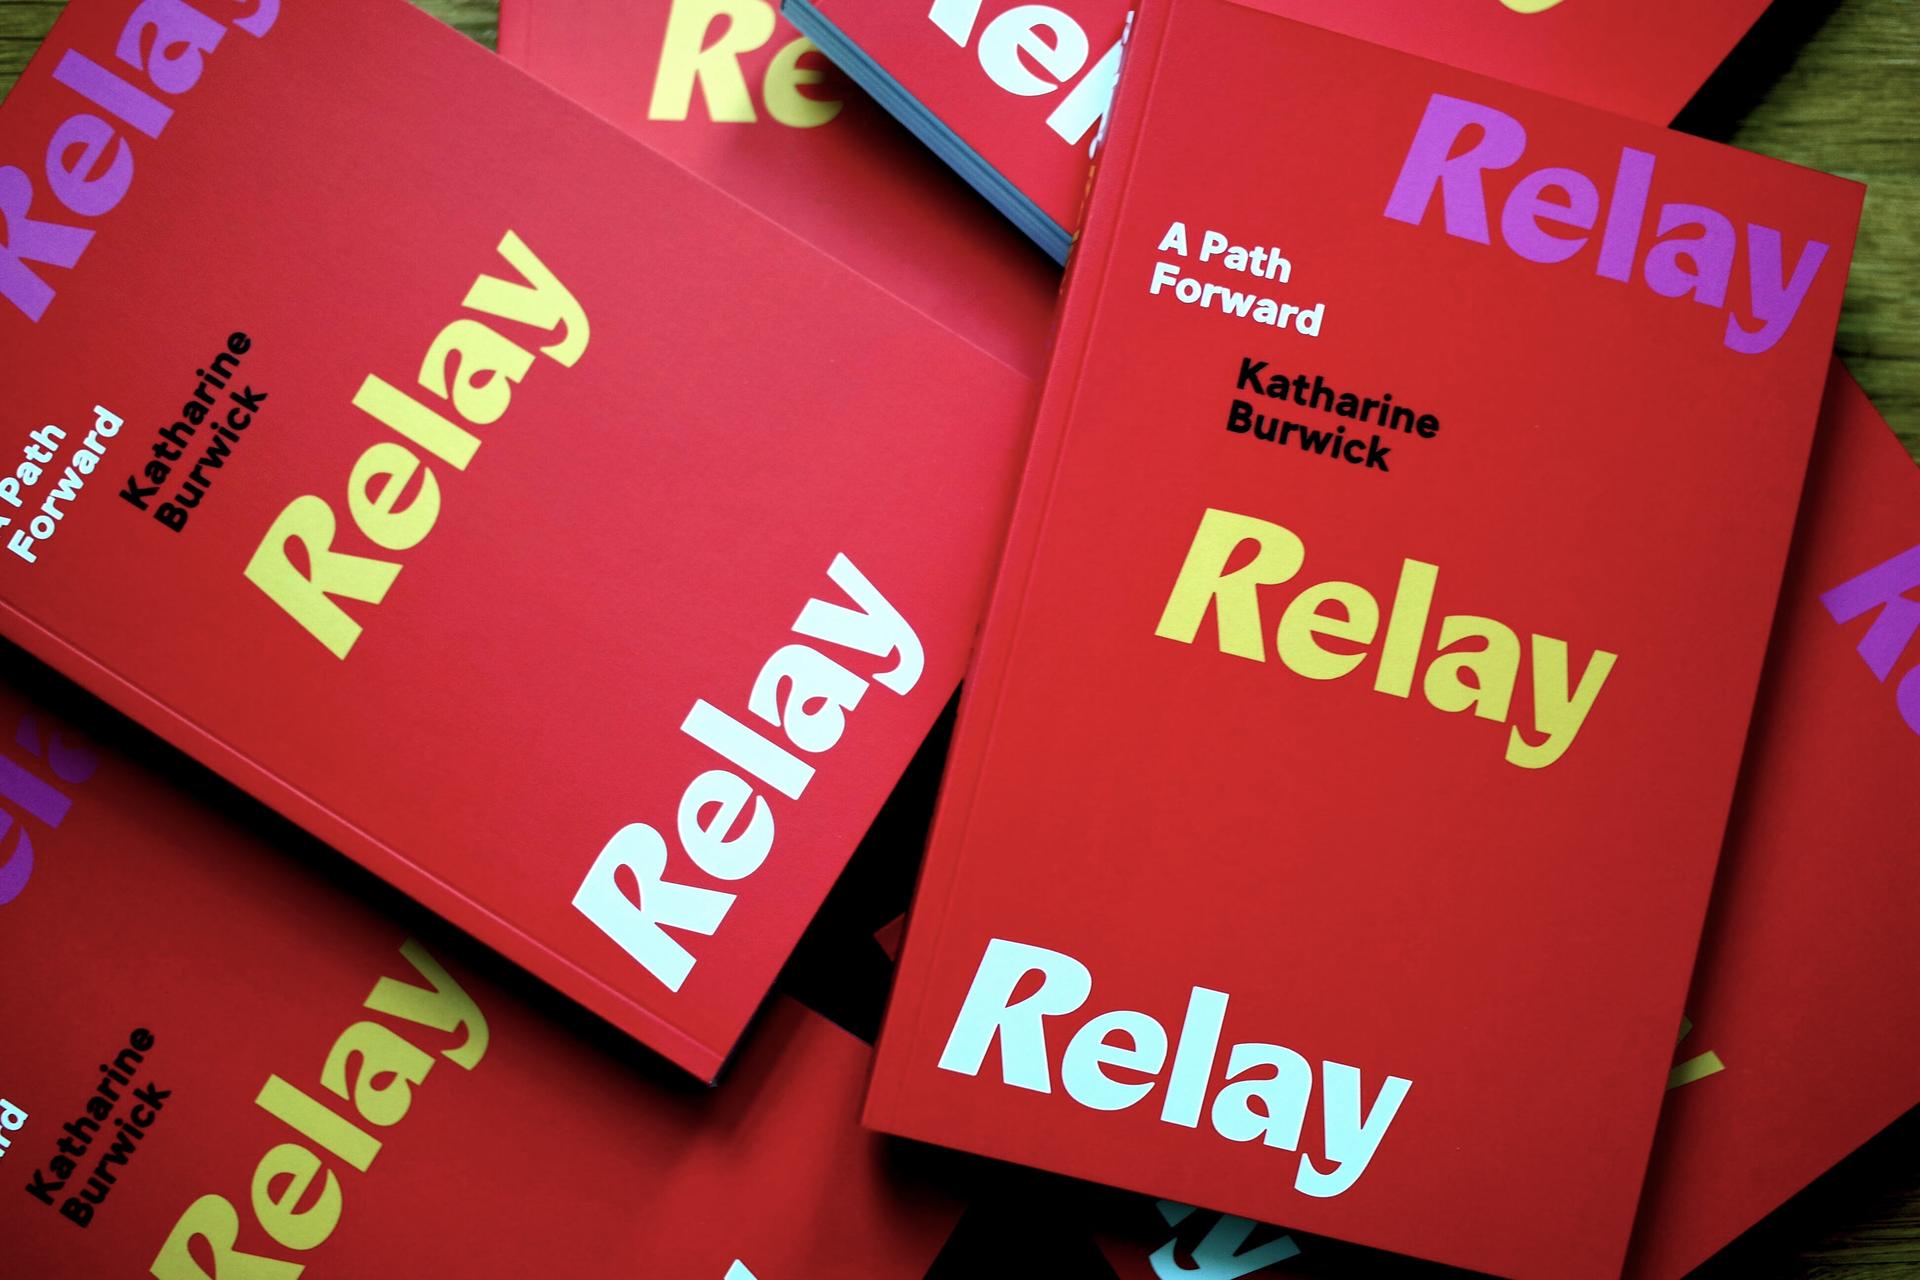 Stack of red books with "Relay" repeated 3 times, and "A Path Forward" with the author's name in parallel